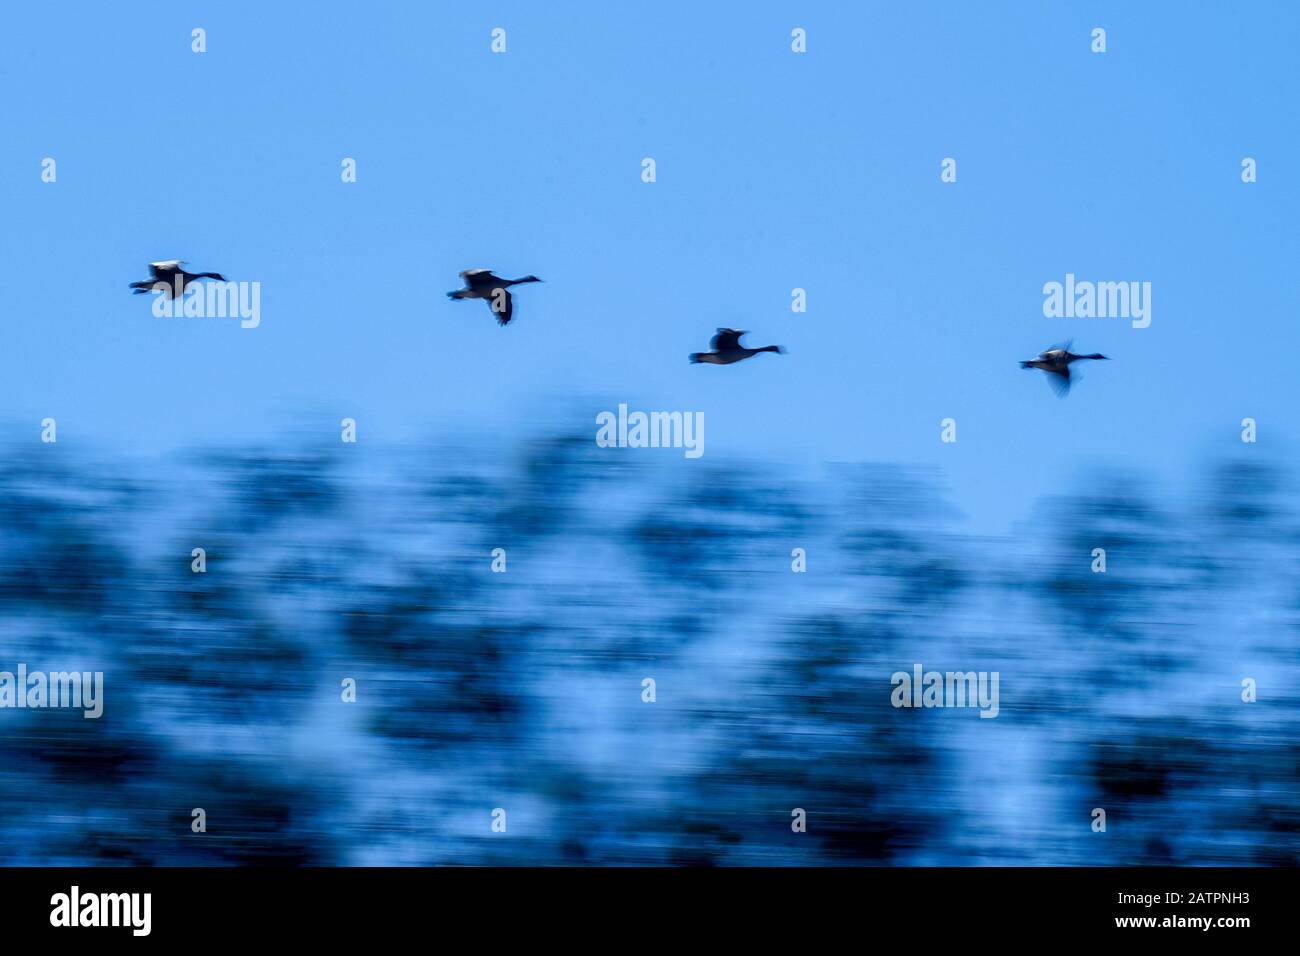 Concept motion blur of Canadian geese flying in formation with a blue sky and abstract trees. Stock Photo